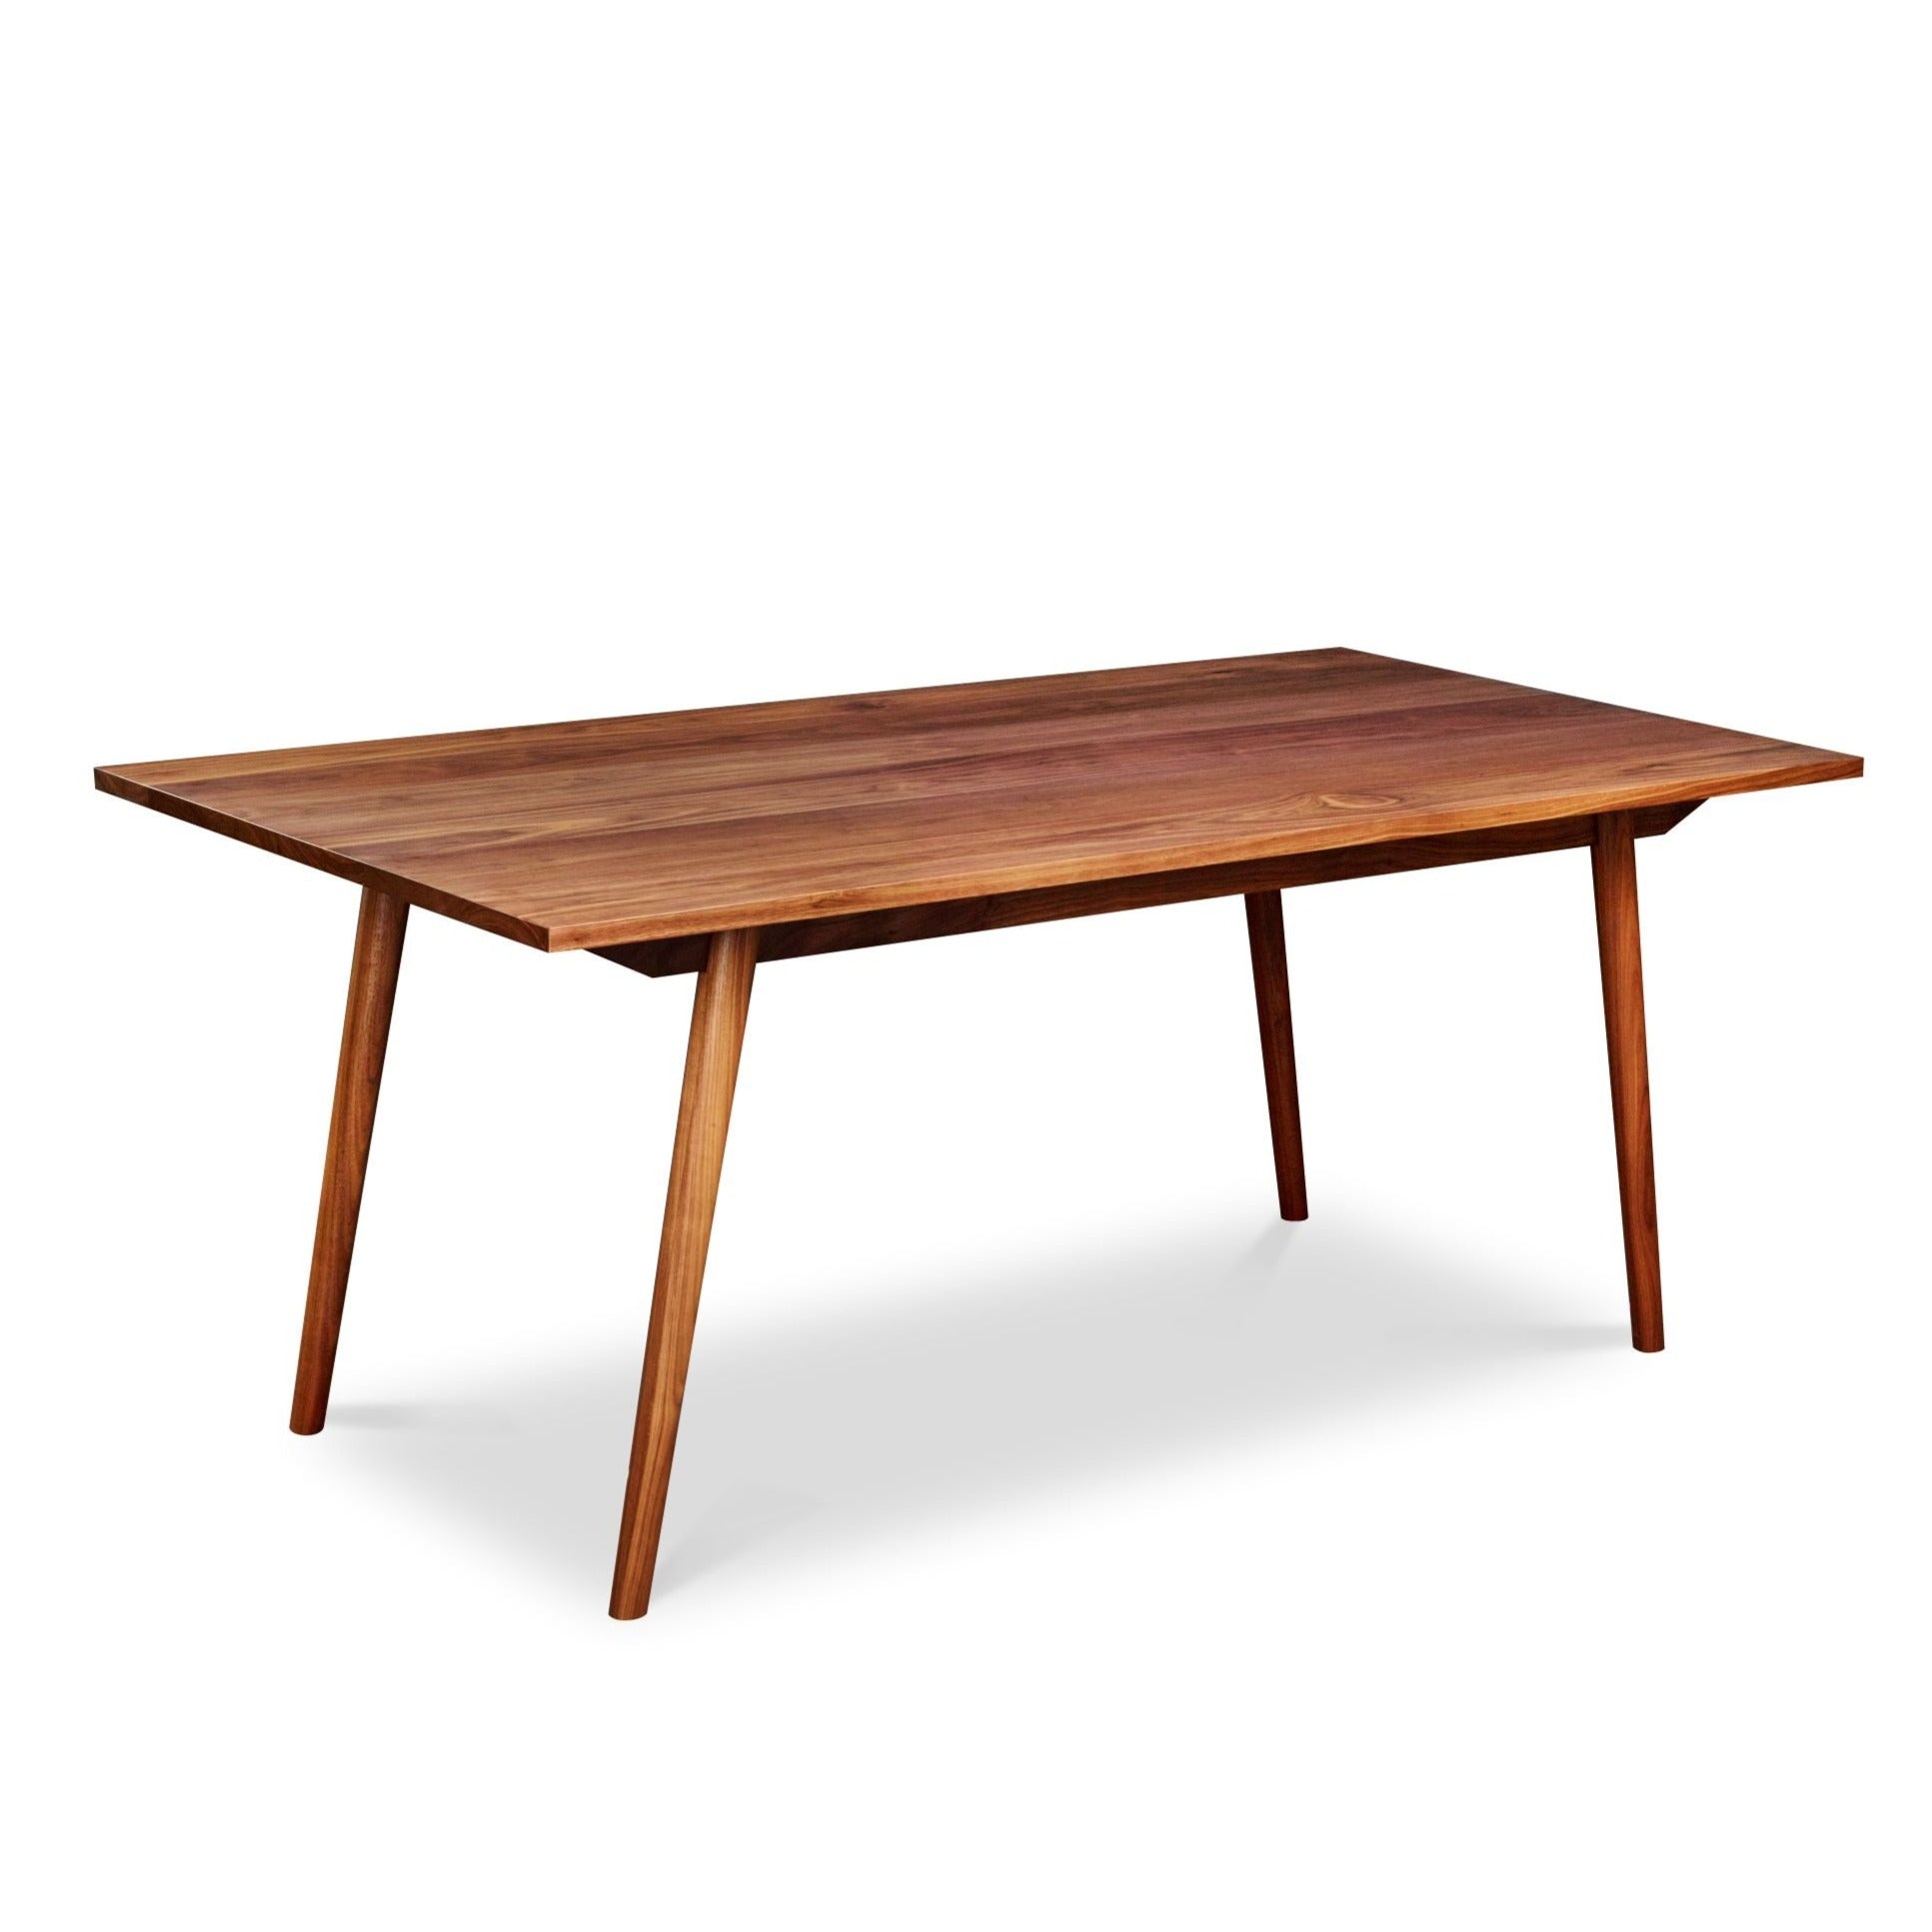 Mid-century Scandinavian rectangle dining table with angled legs in solid walnut wood